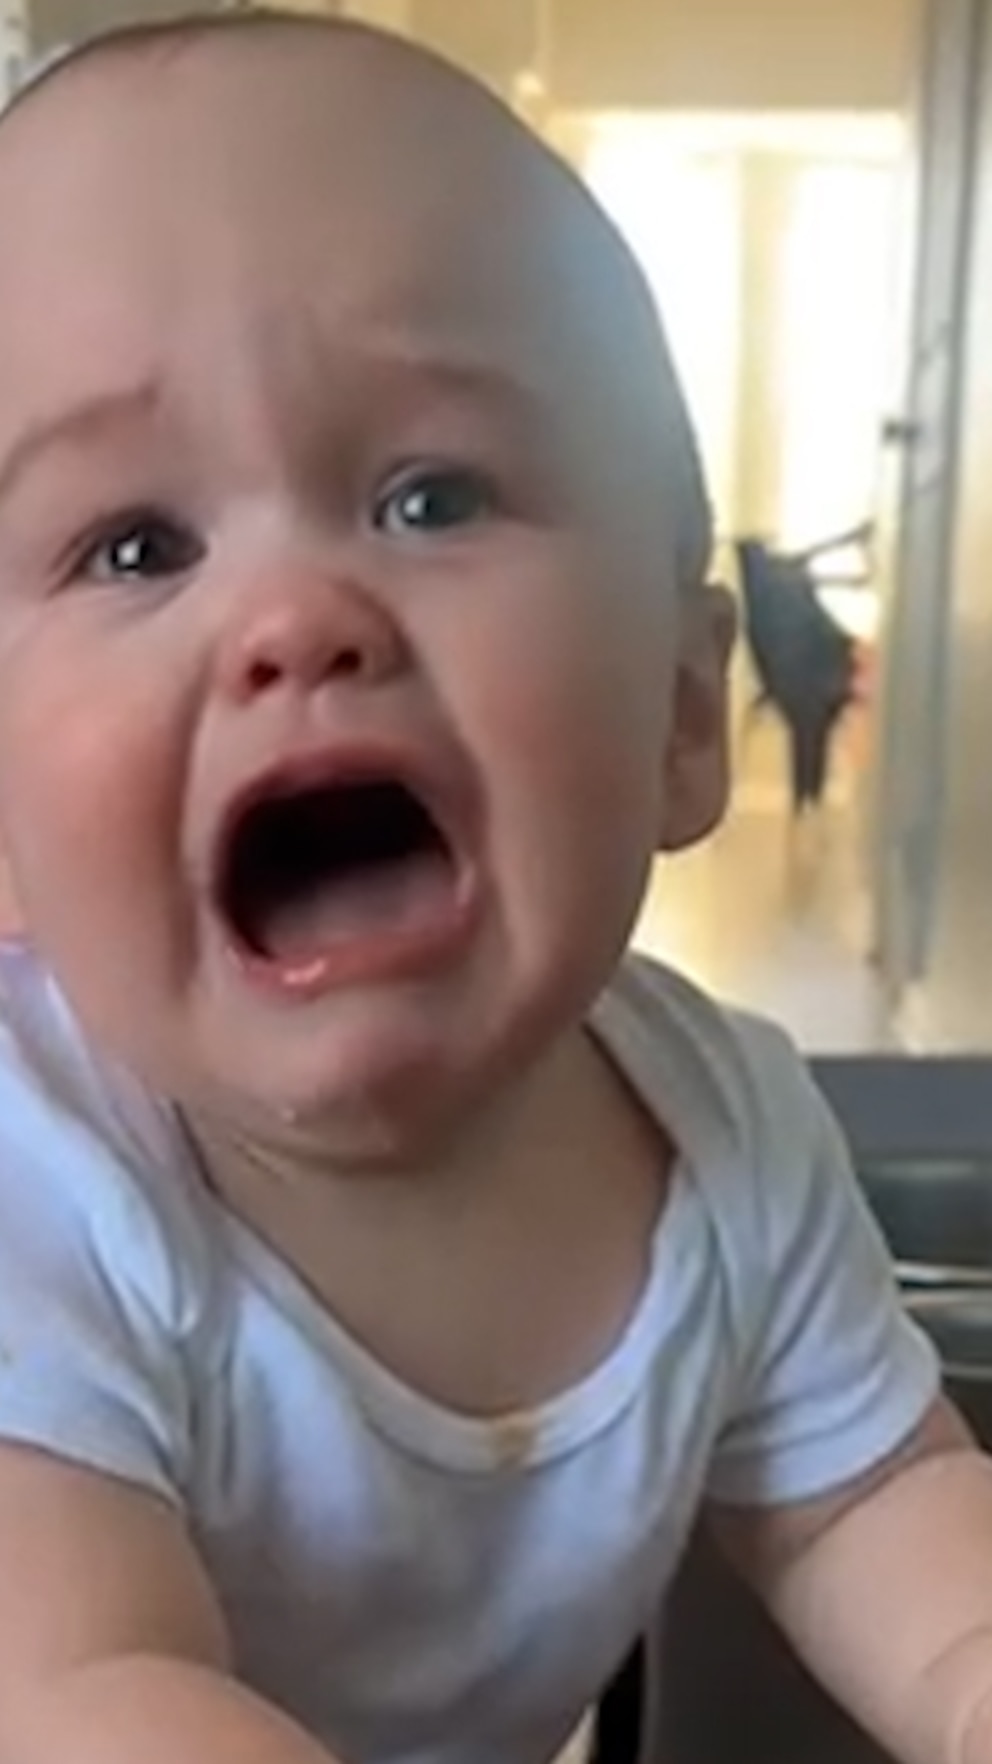 WATCH: Baby has precious reaction to not being allowed to try dog's food